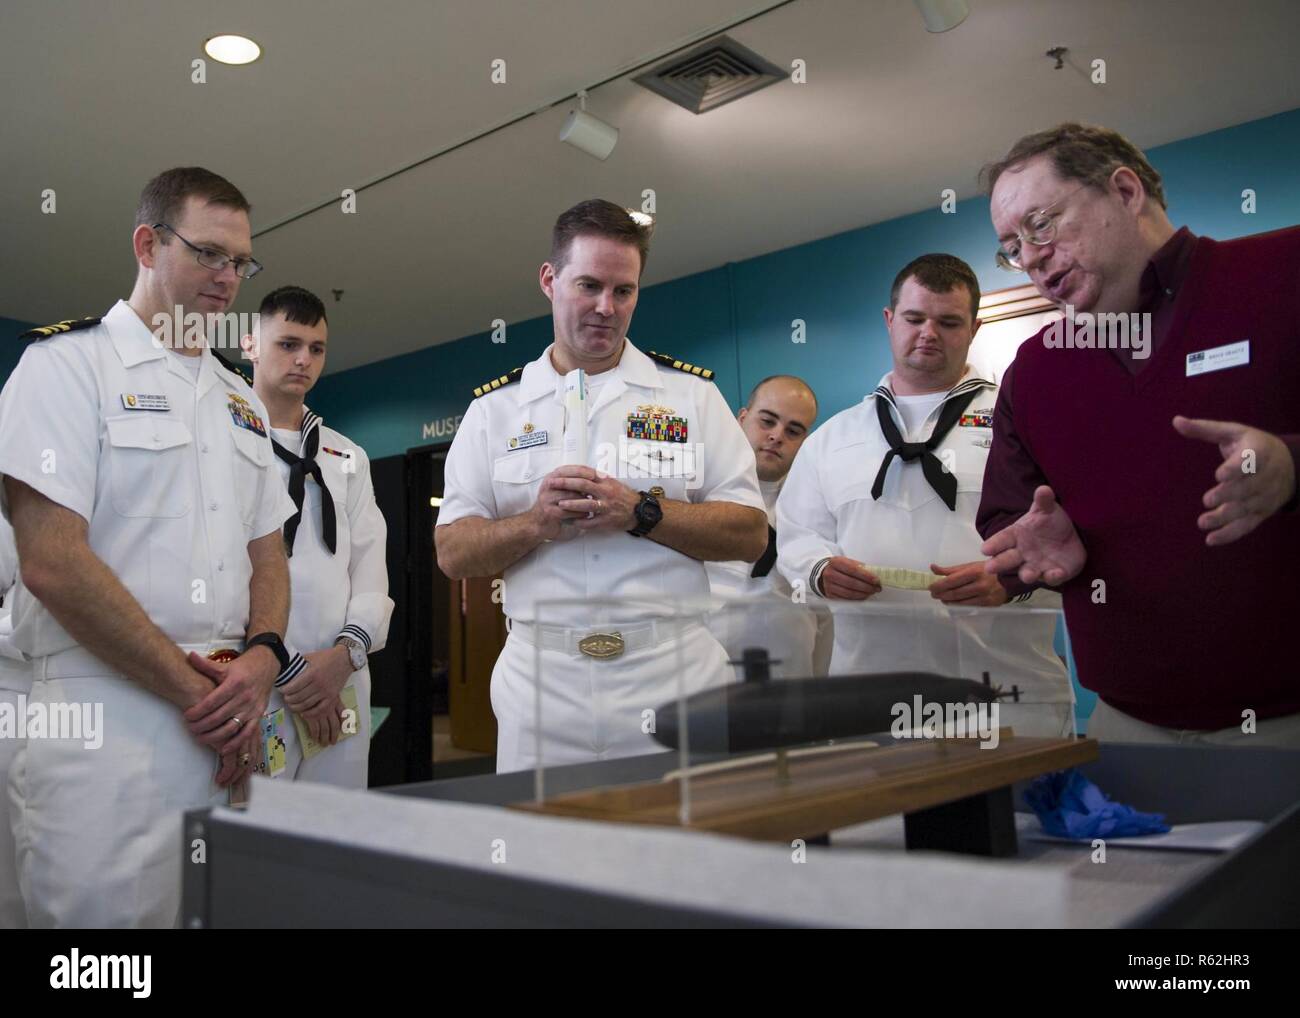 Sailors assigned to the Ohio-class guided-missile submarine USS Florida (SSGN 728) attend a tour of the Museum of Florida History during a namesake visit to the city of Tallahassee. Navy events such as the Florida namesake visit are interactive ways to share what the Navy does for our country with a number of different communities. Florida is one of four guided-missile submarines in the U.S Navy fleet and one of two SSGNs stationed at Naval Submarine Base Kings Bay, Georgia. Stock Photo